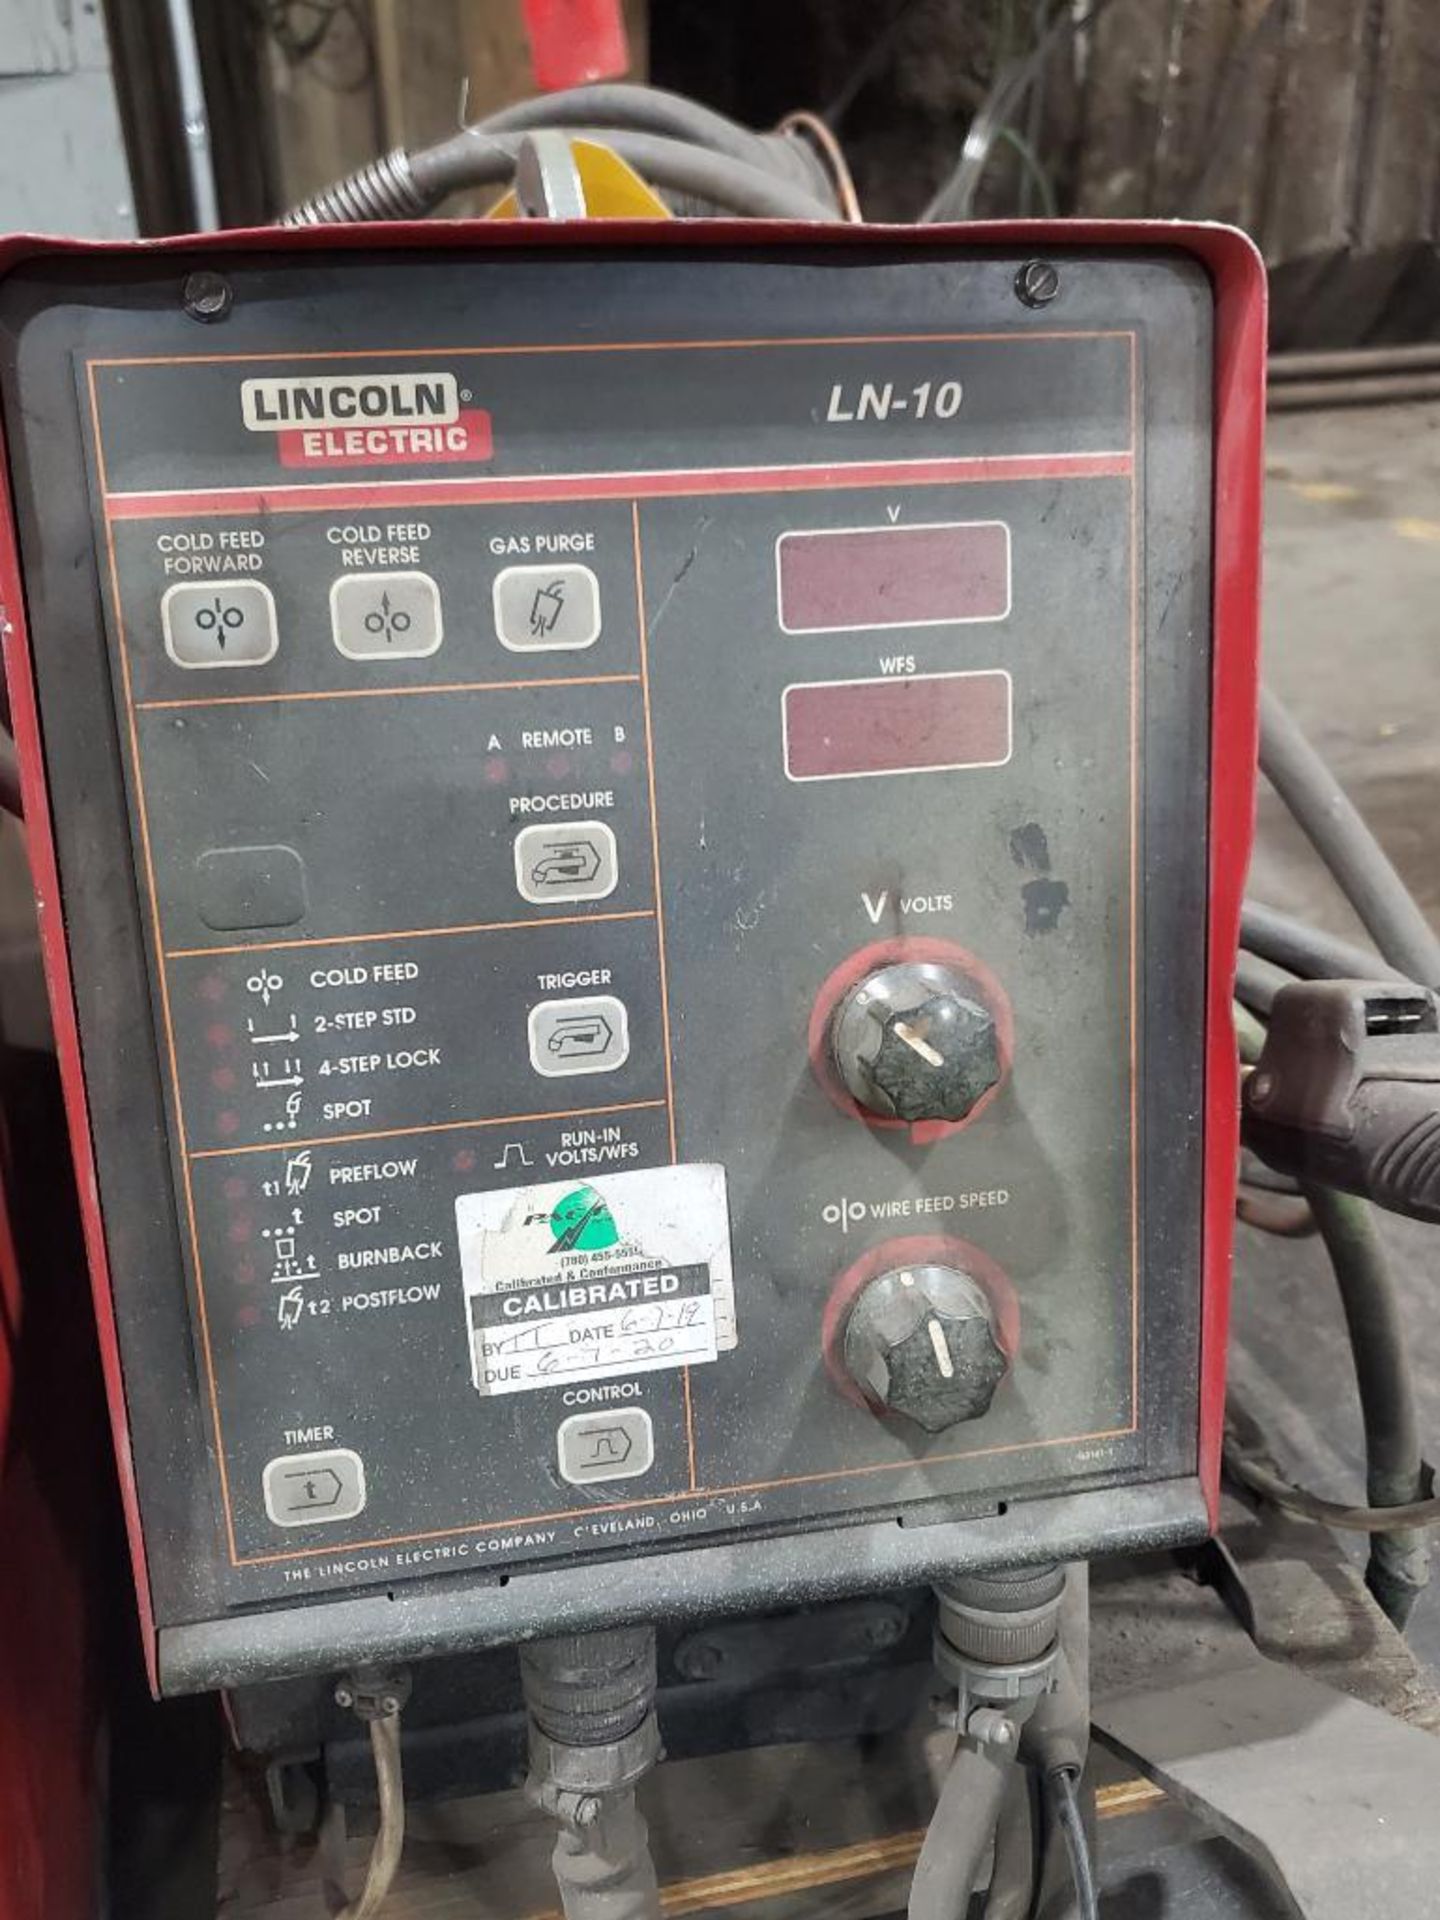 LINCOLN ELECTRIC IDEALARC DC-600 WELDER 230-460V WITH LN-10 WIRE FEED SN.U1121002540 115V - Image 5 of 7